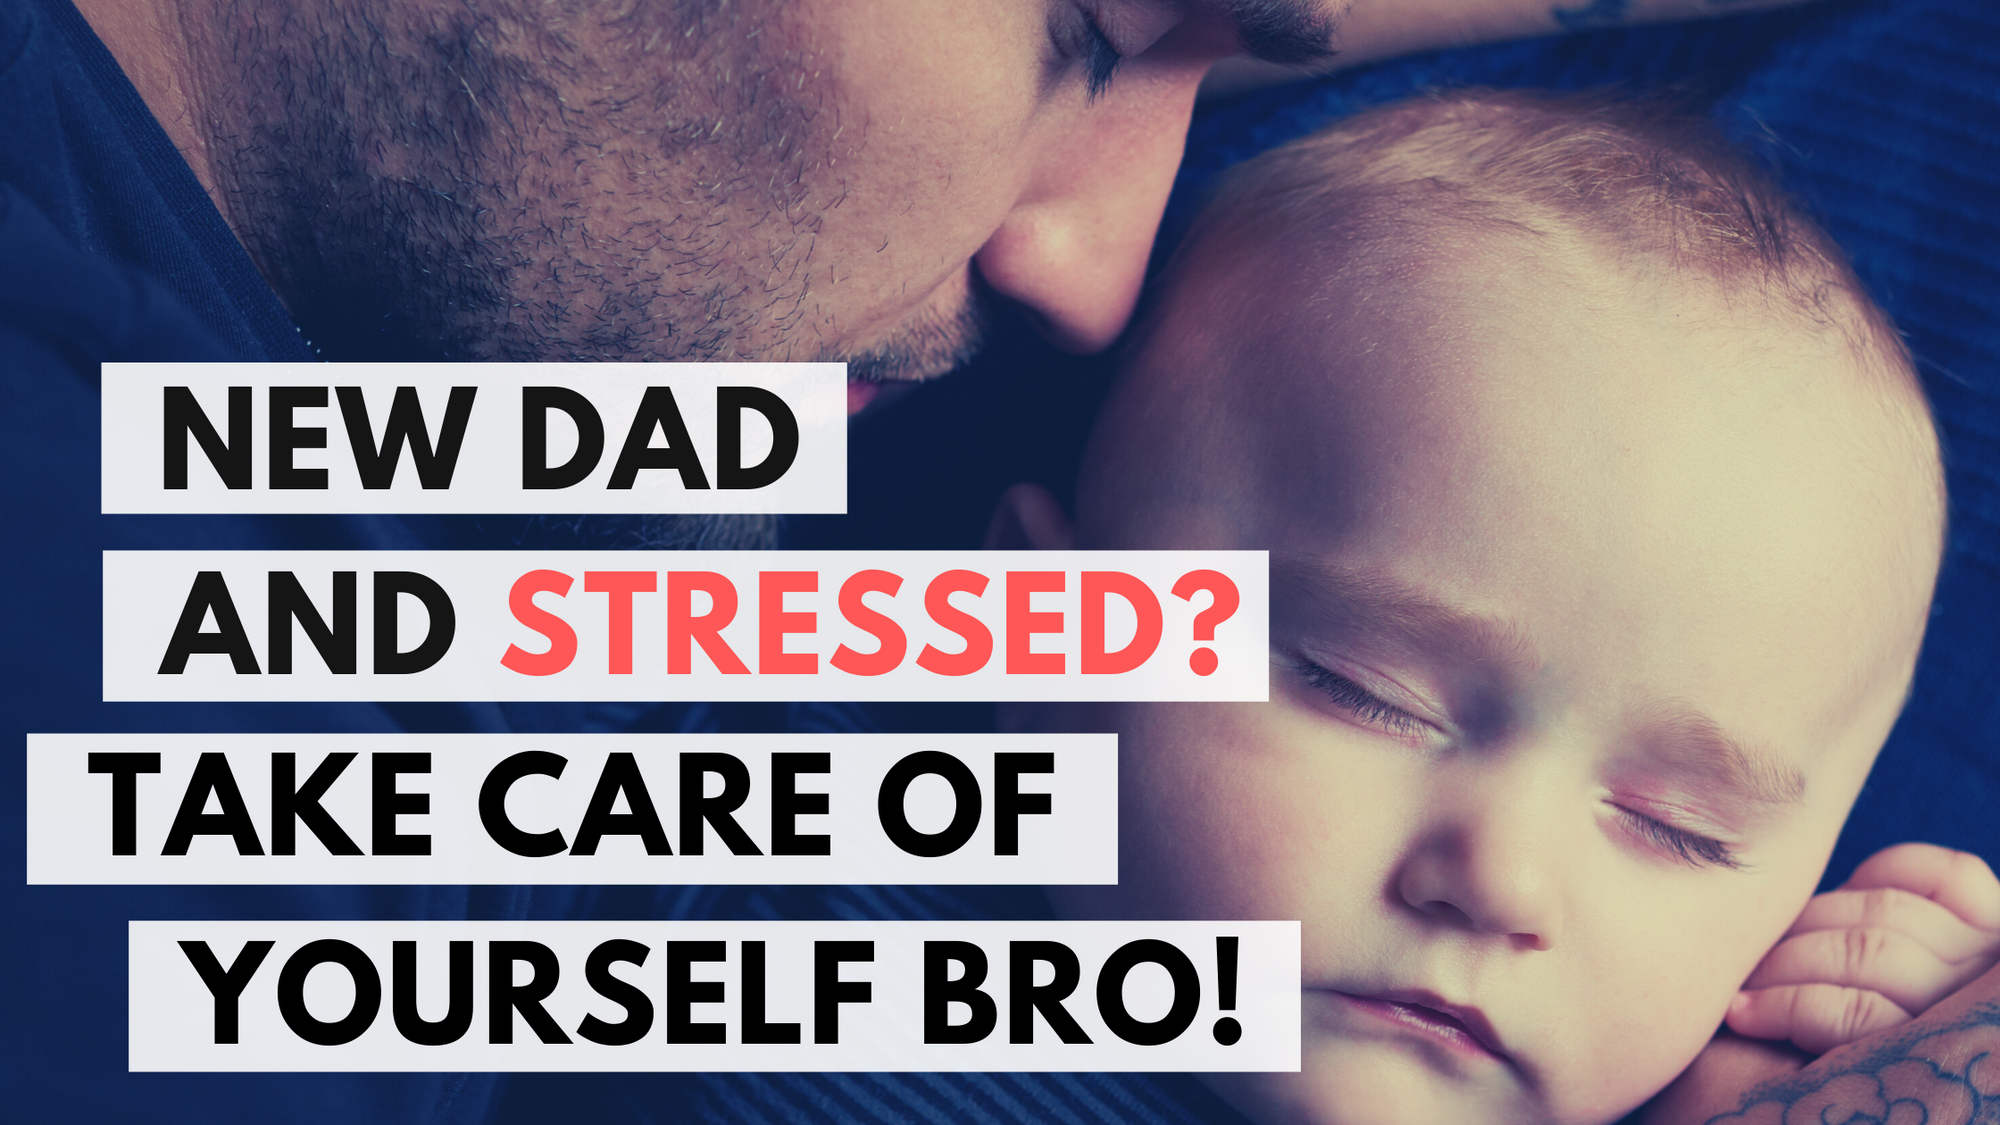 New Dad and Stressed? Take Care of Yourself Bro